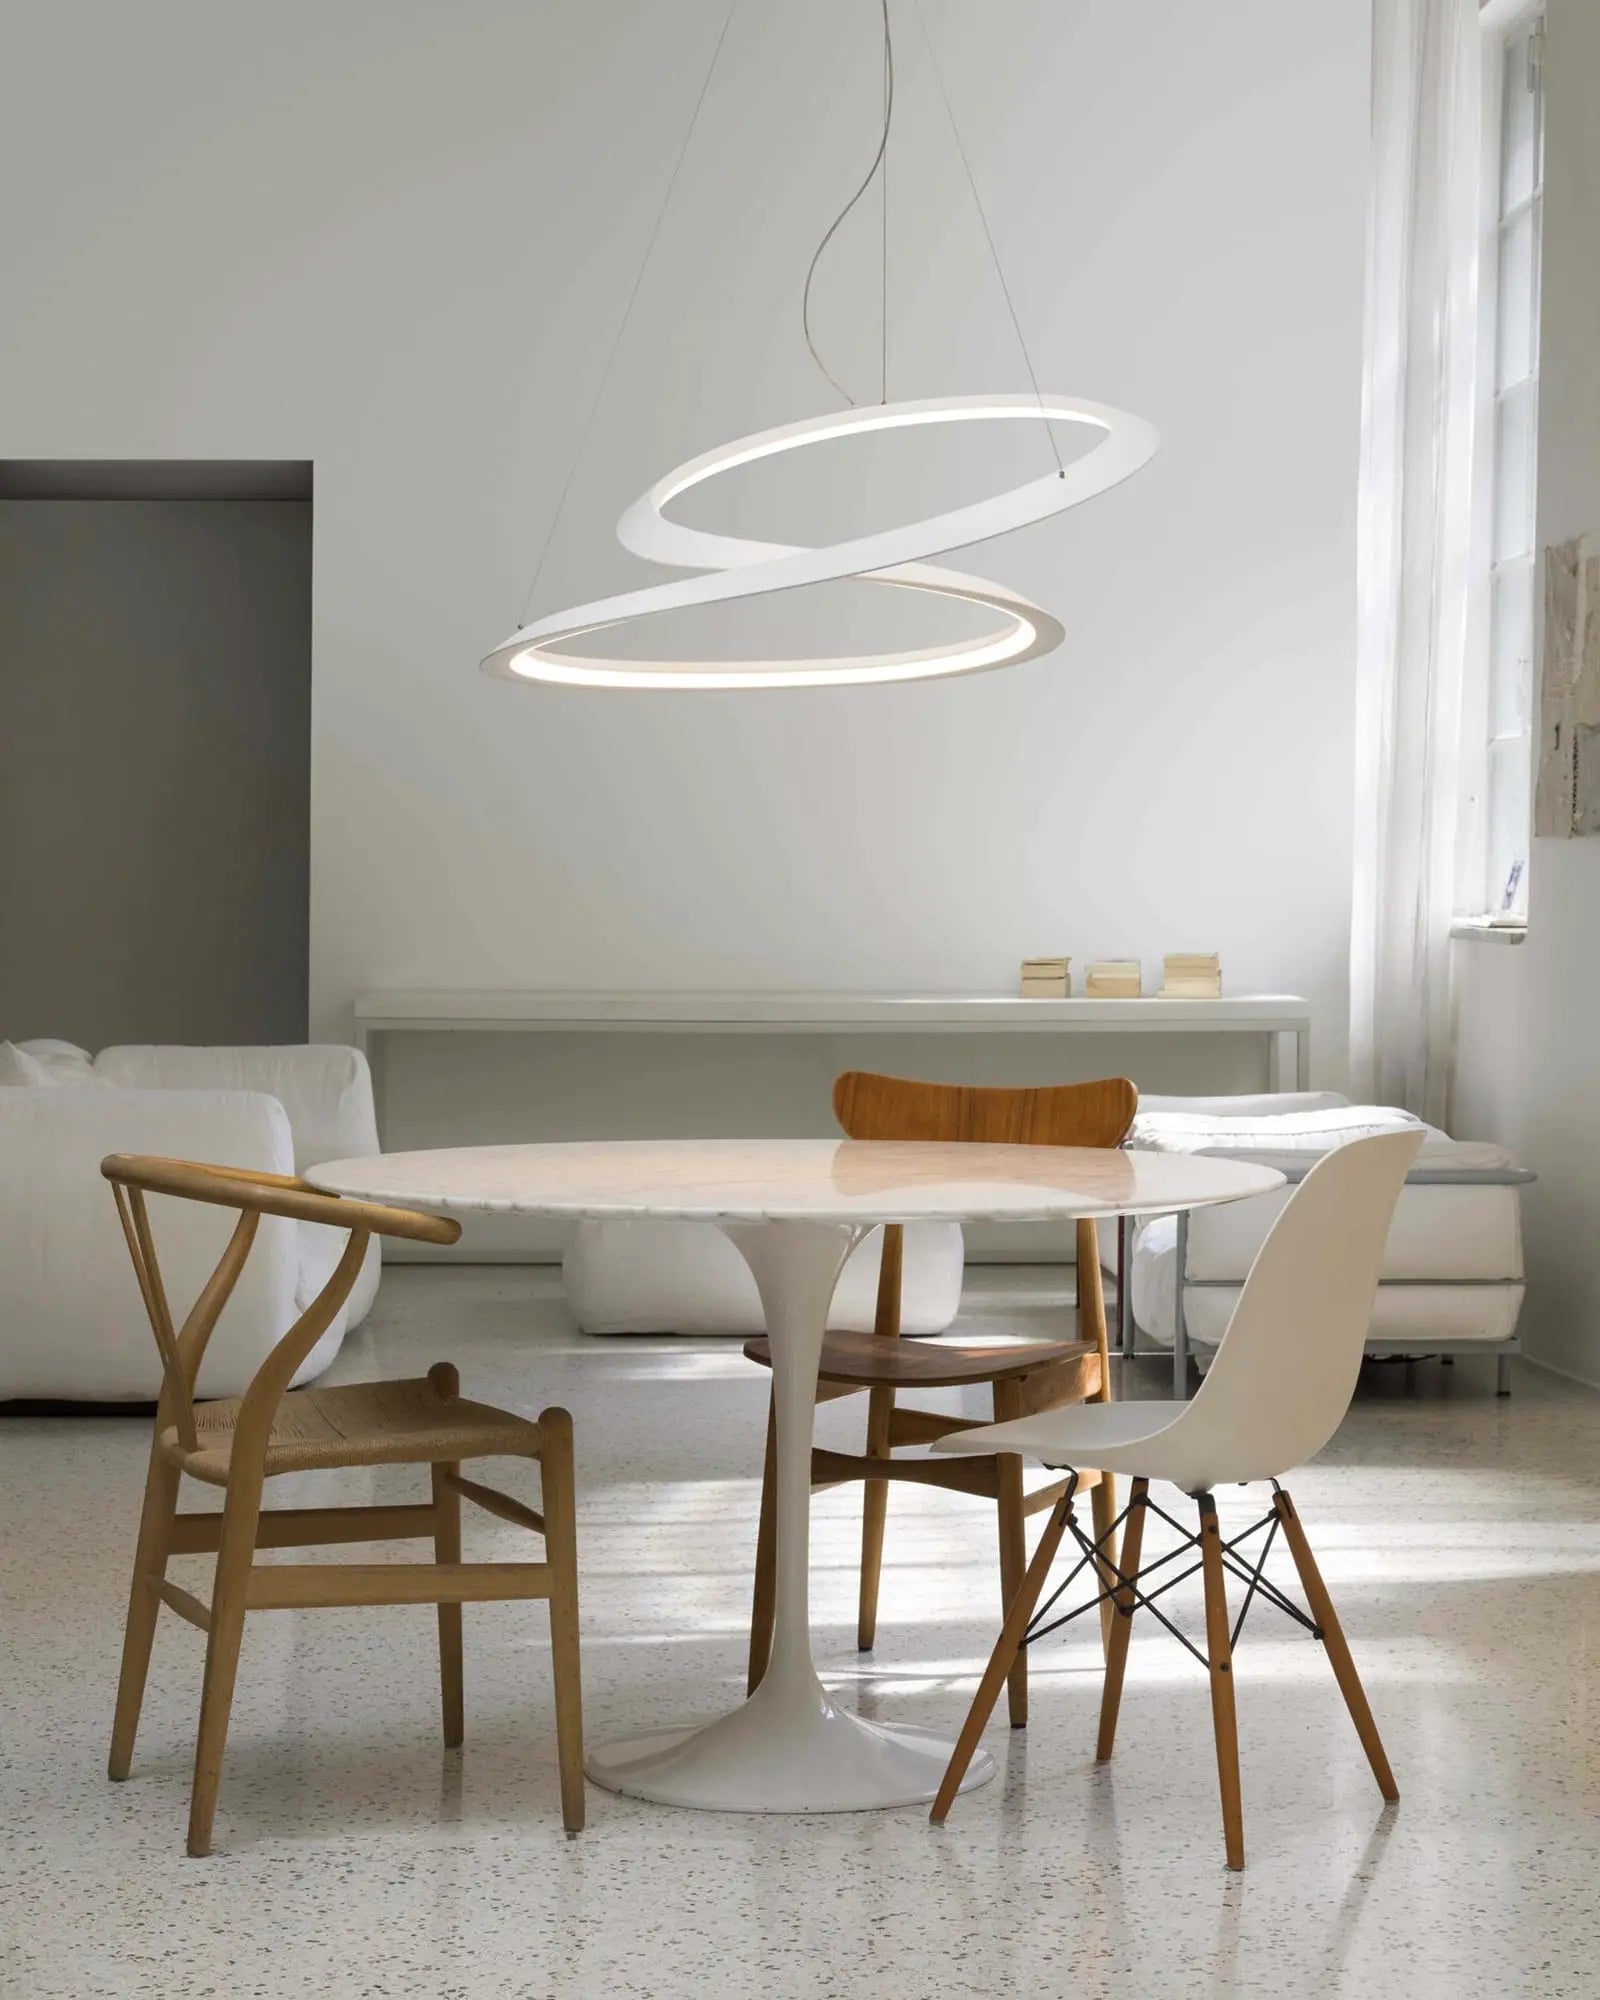 Kepler contemporary LED pendant light above a round table